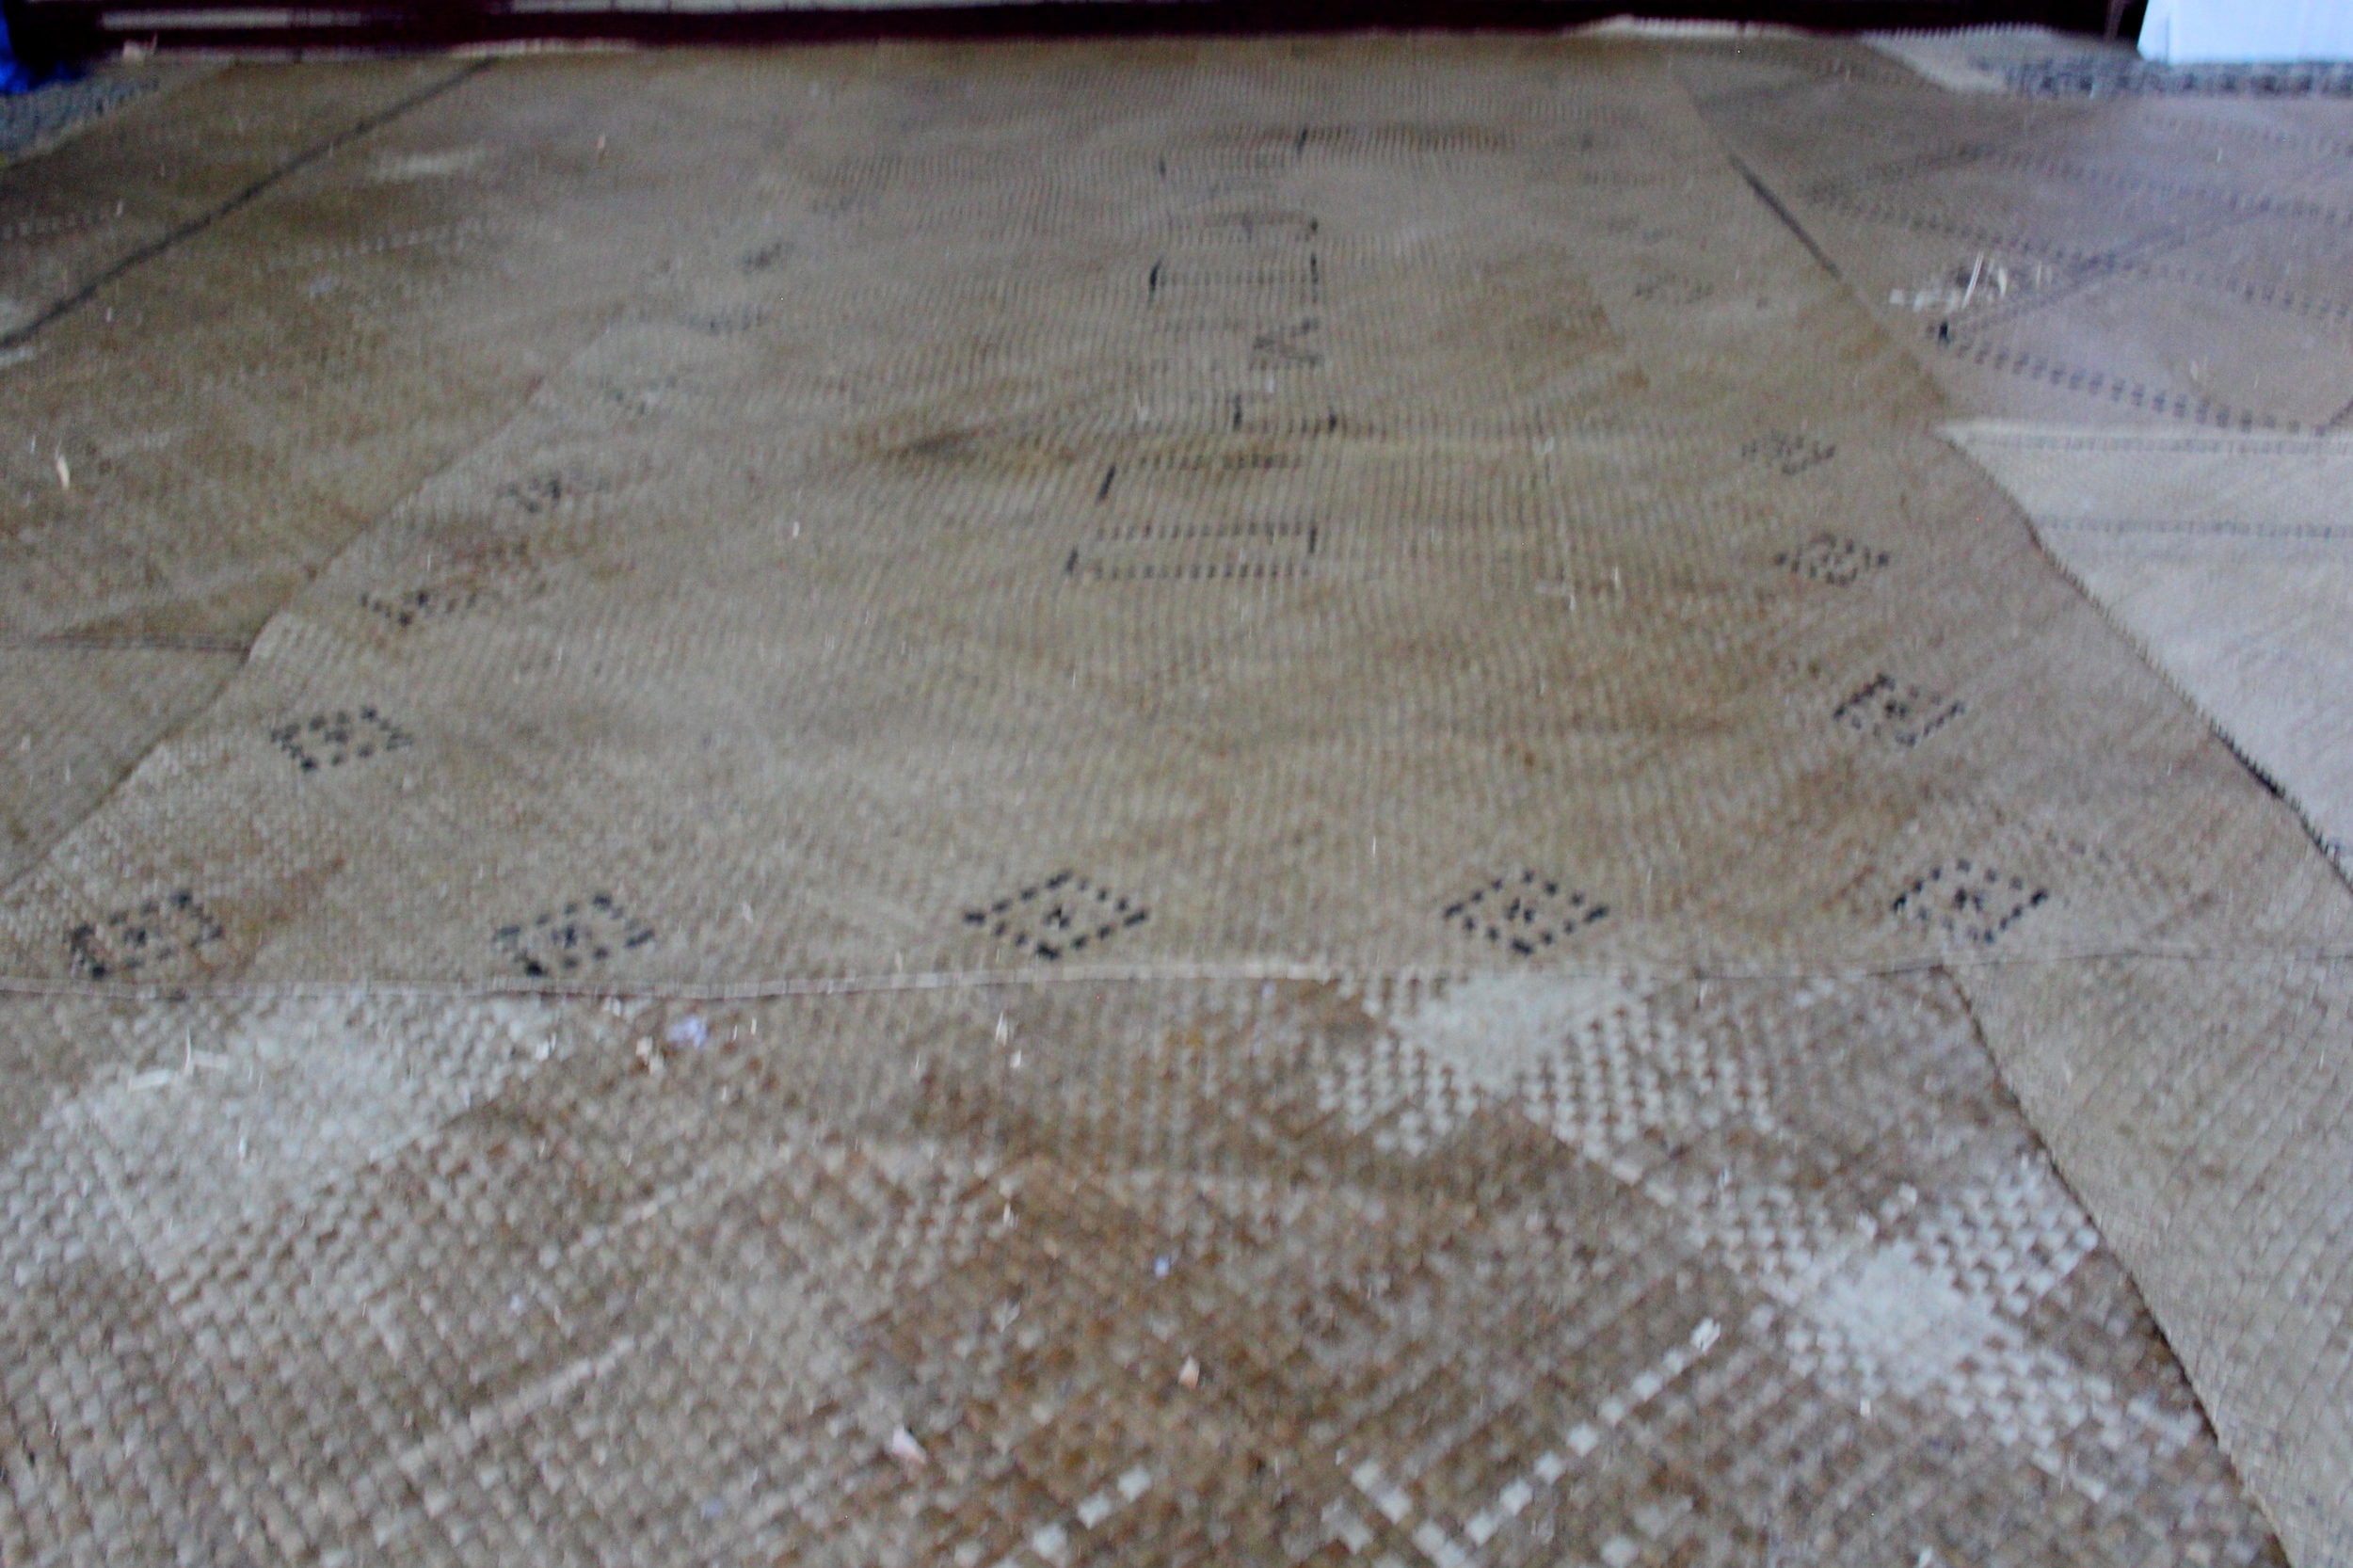 Woven mats covering the floor